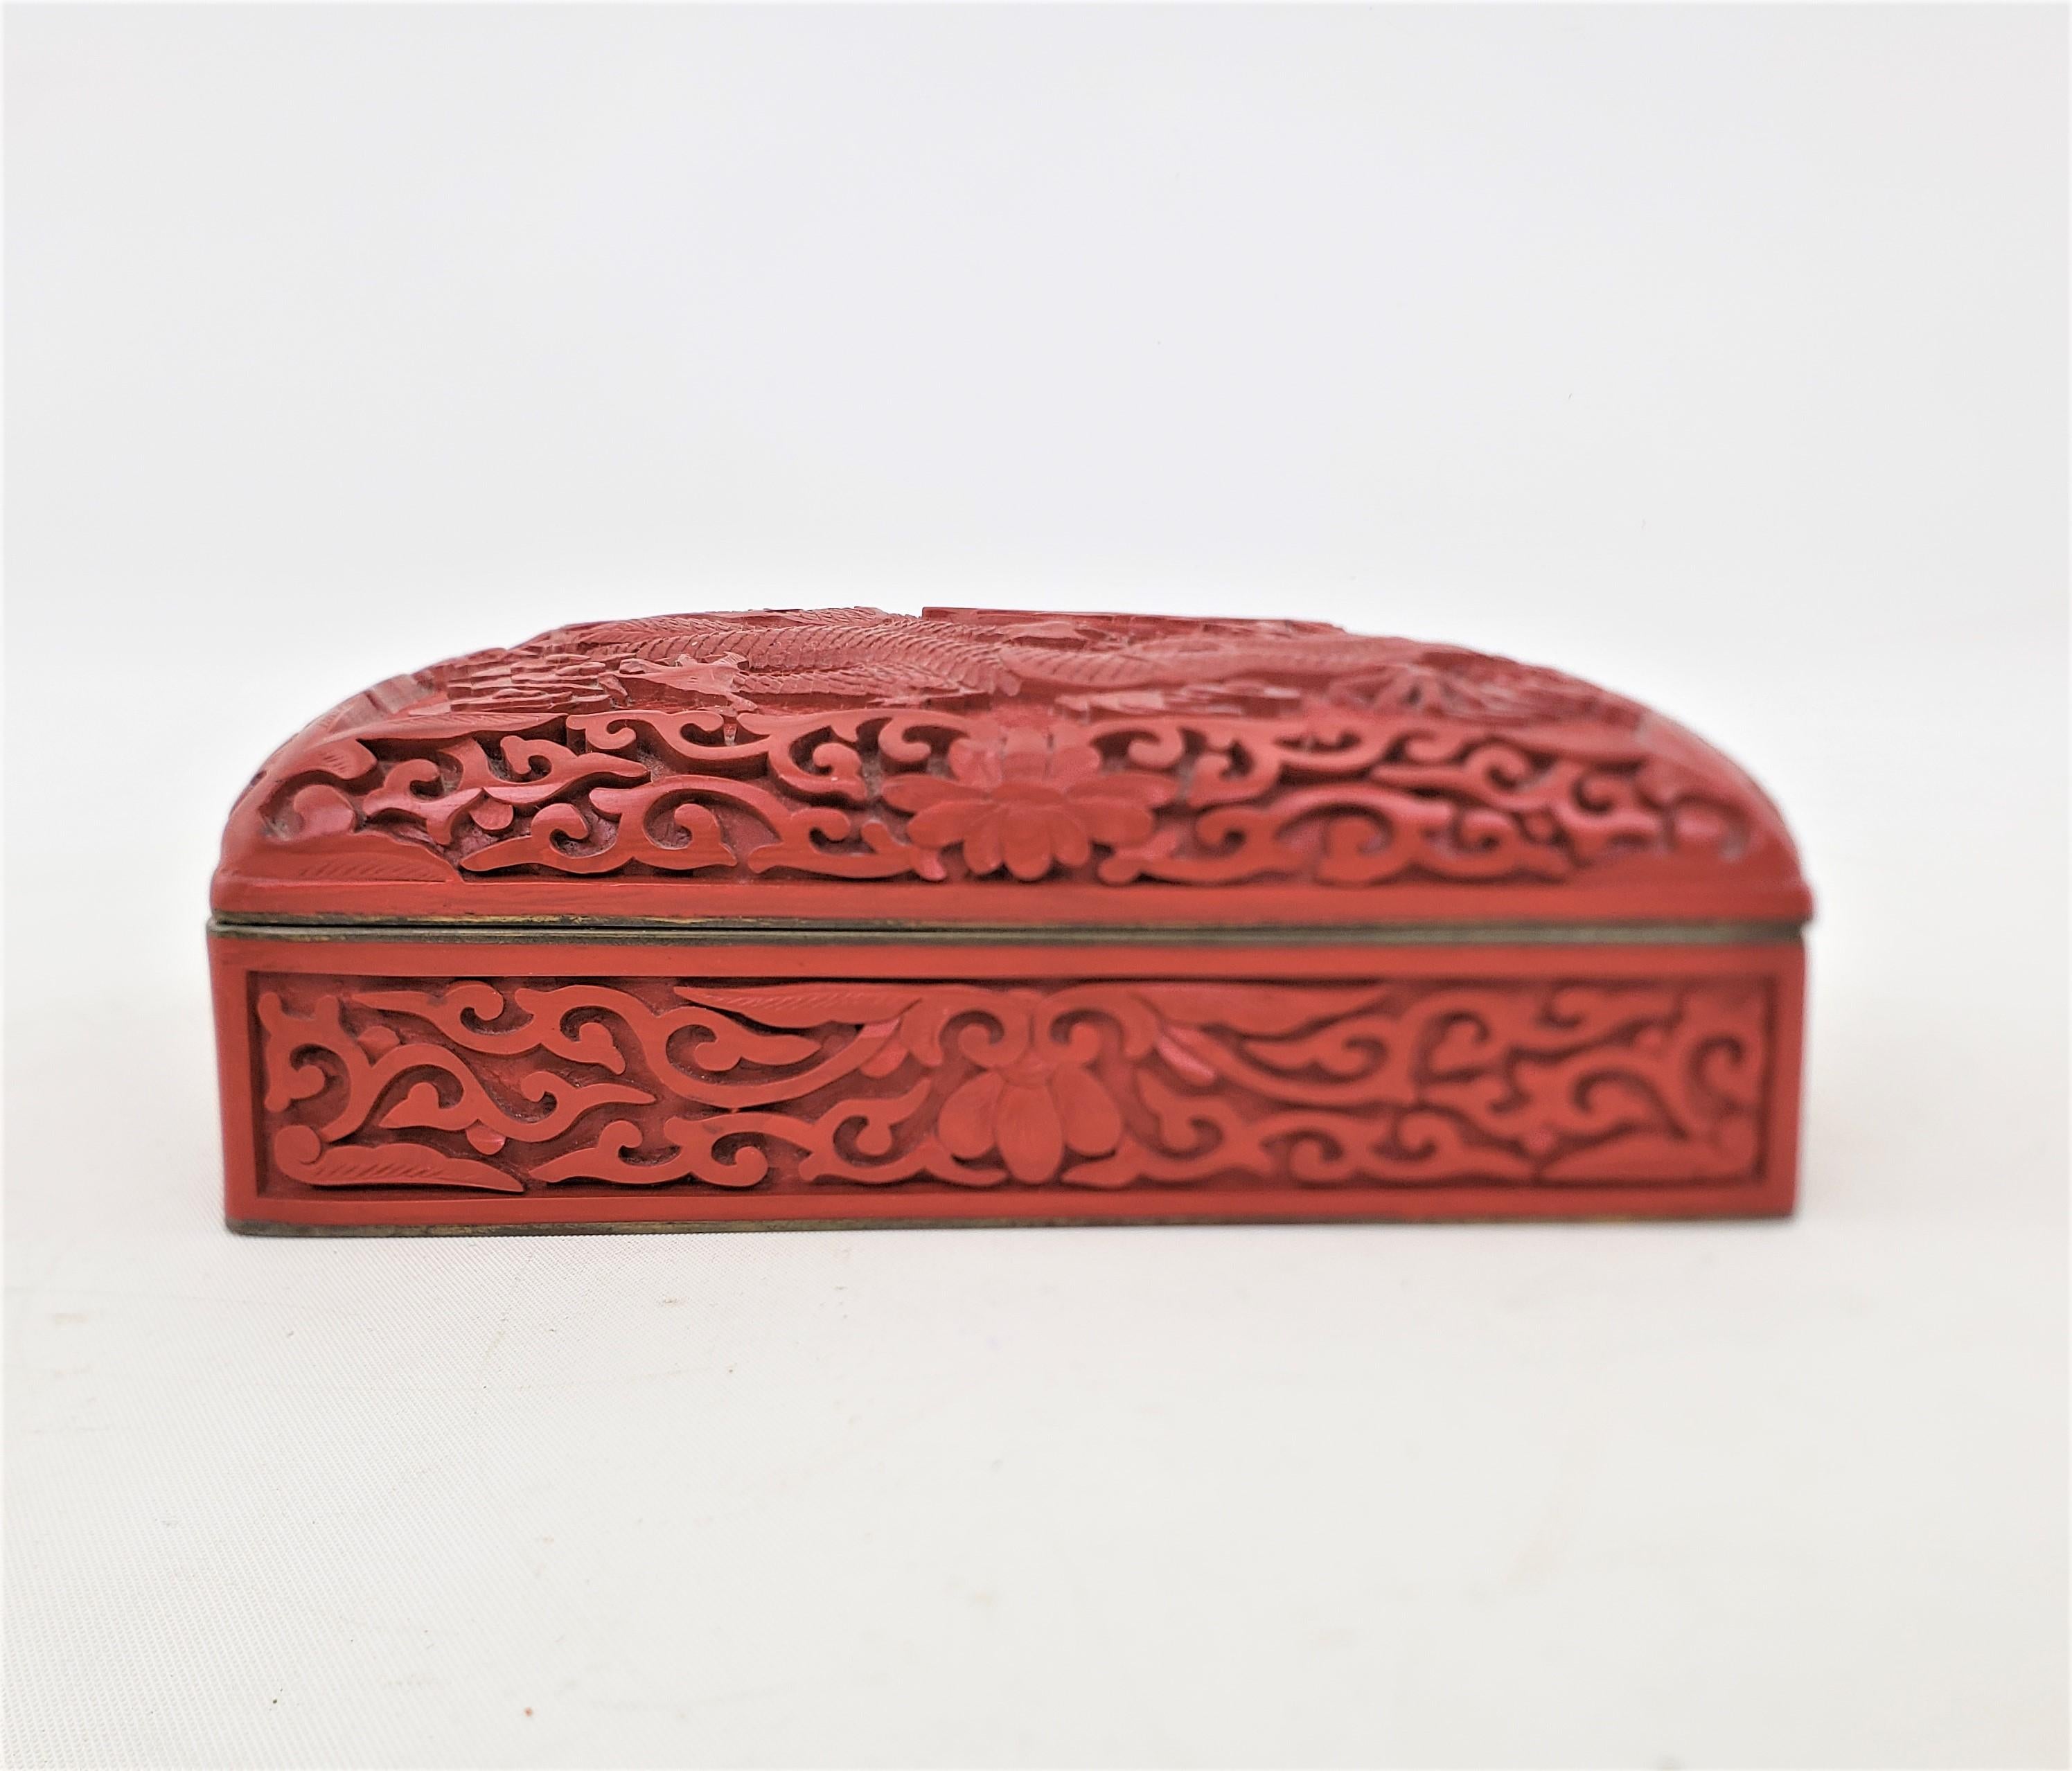 Enameled Antique Chinese Carved Cinnabar & Enamelled Box with Imperial Dragon Top For Sale